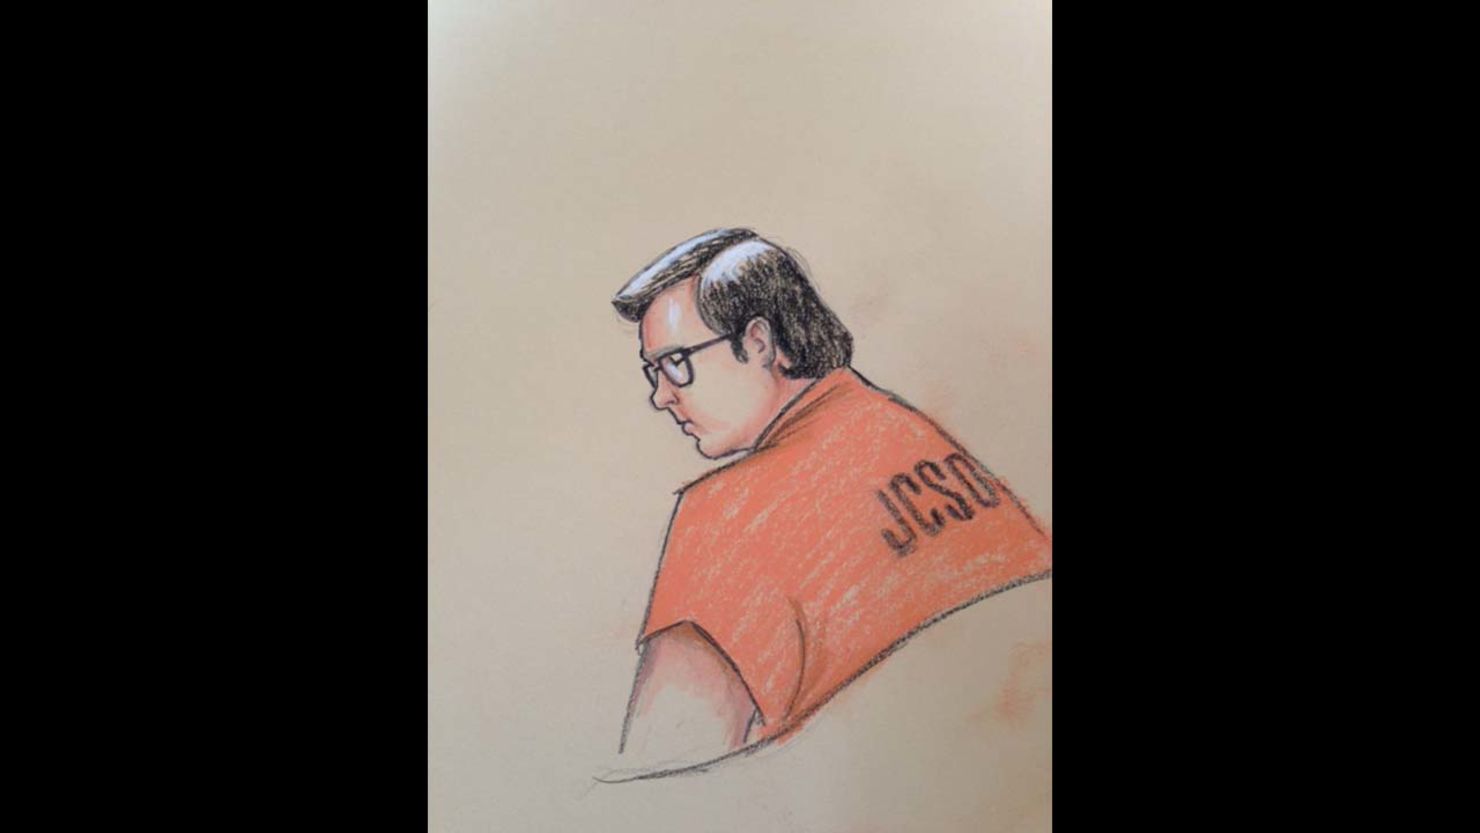 An artist's rendering of  Austin Sigg, who faces 18 criminal counts in the death of Jessica Ridgeway.